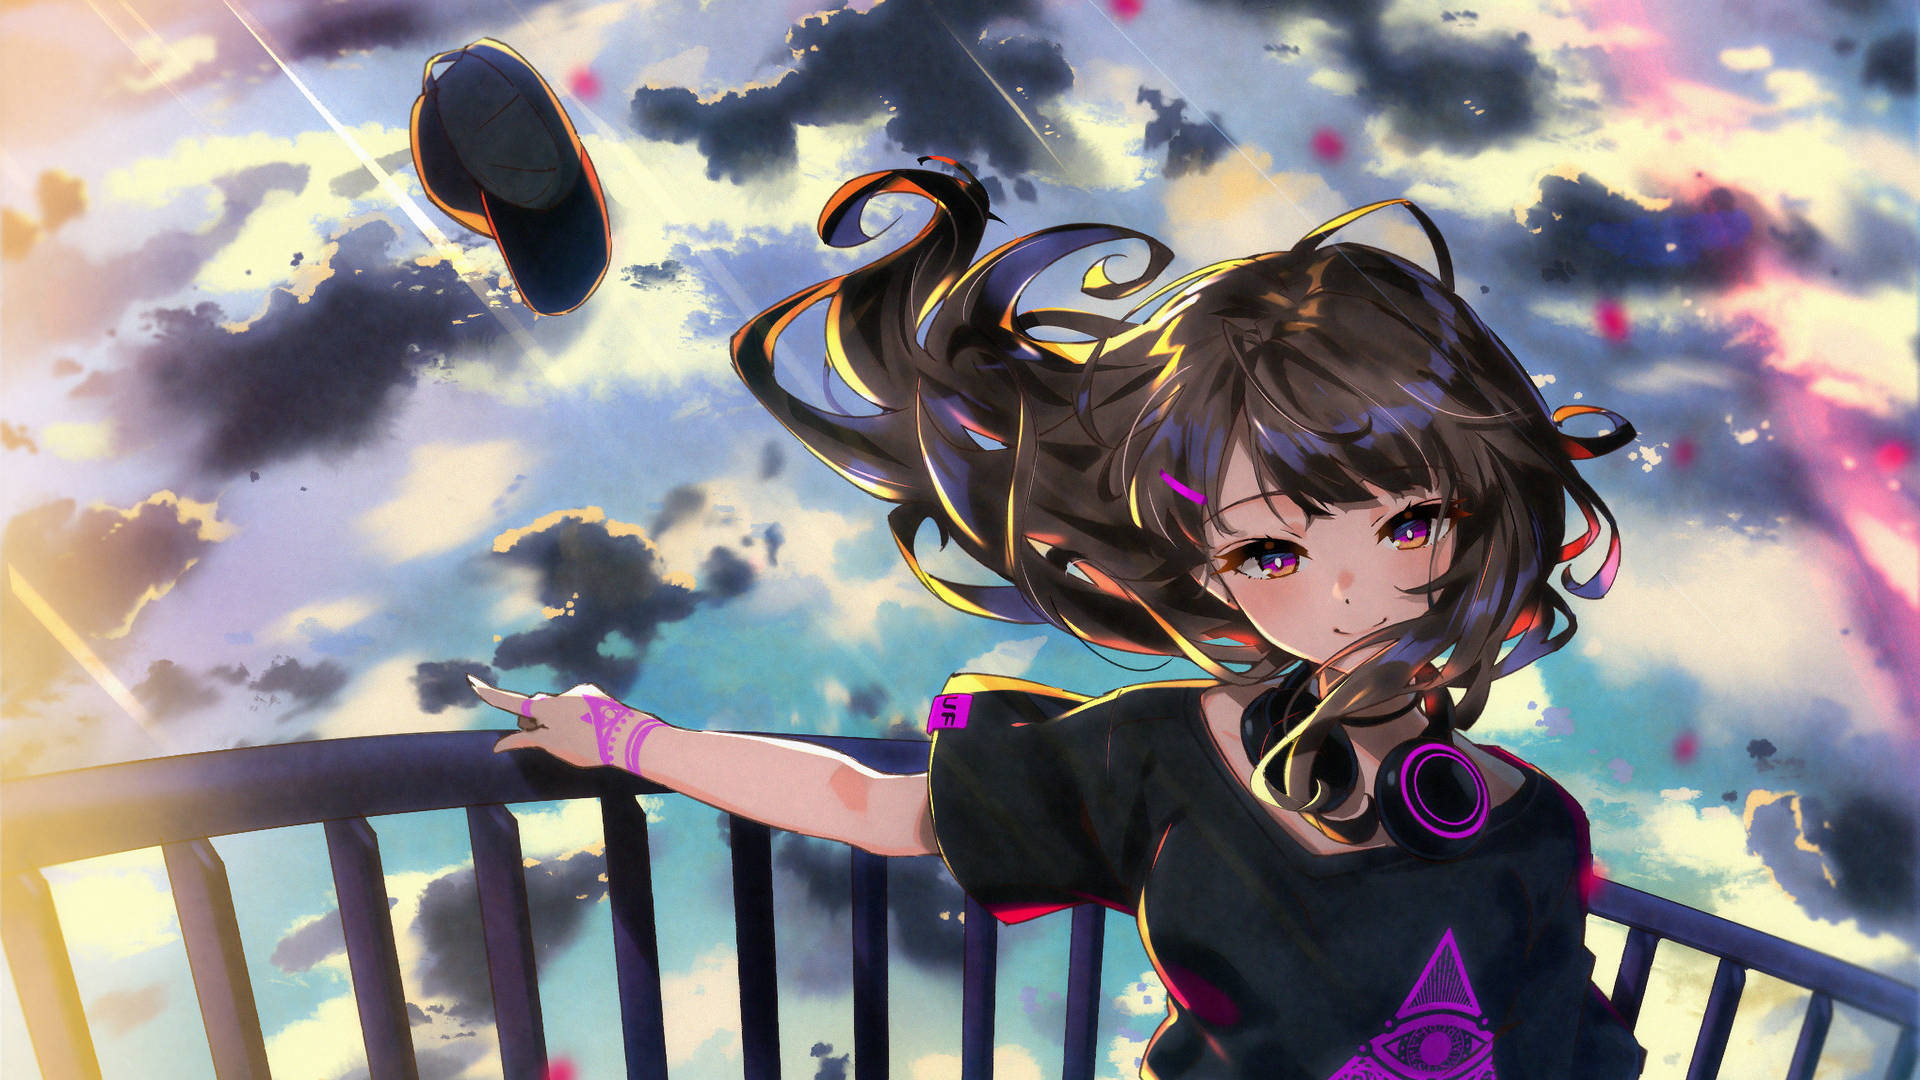 A painting of a Japanese anime-style girl in colorful clothing Wallpaper